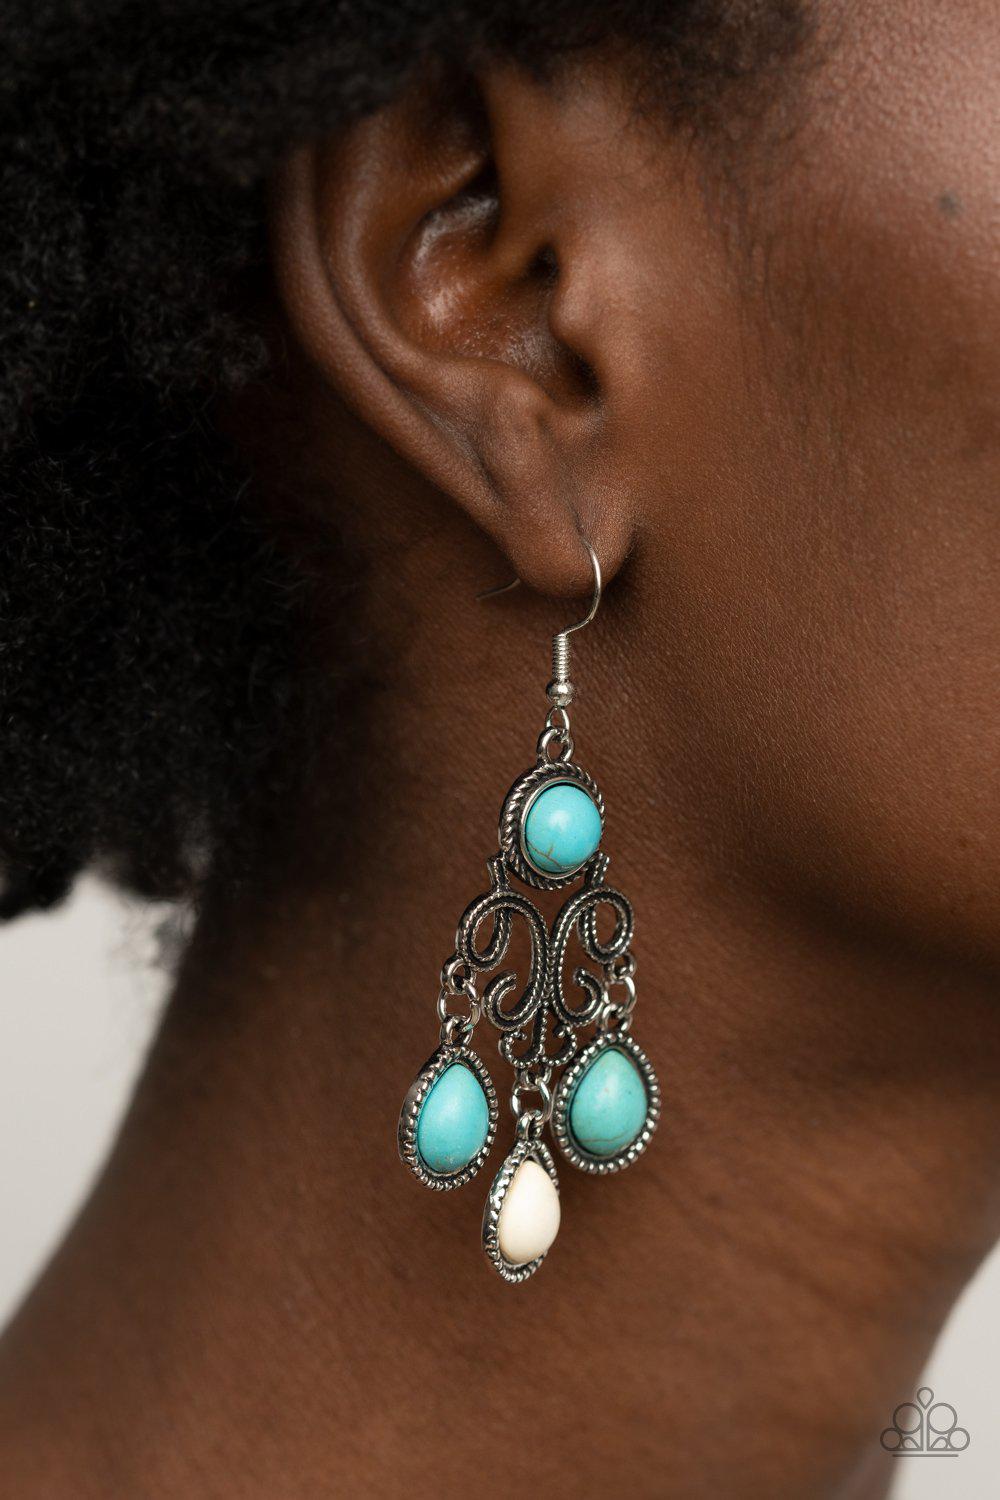 Canyon Chandelier Multi Turquoise Blue and White Stone Earrings - Paparazzi Accessories- model - CarasShop.com - $5 Jewelry by Cara Jewels